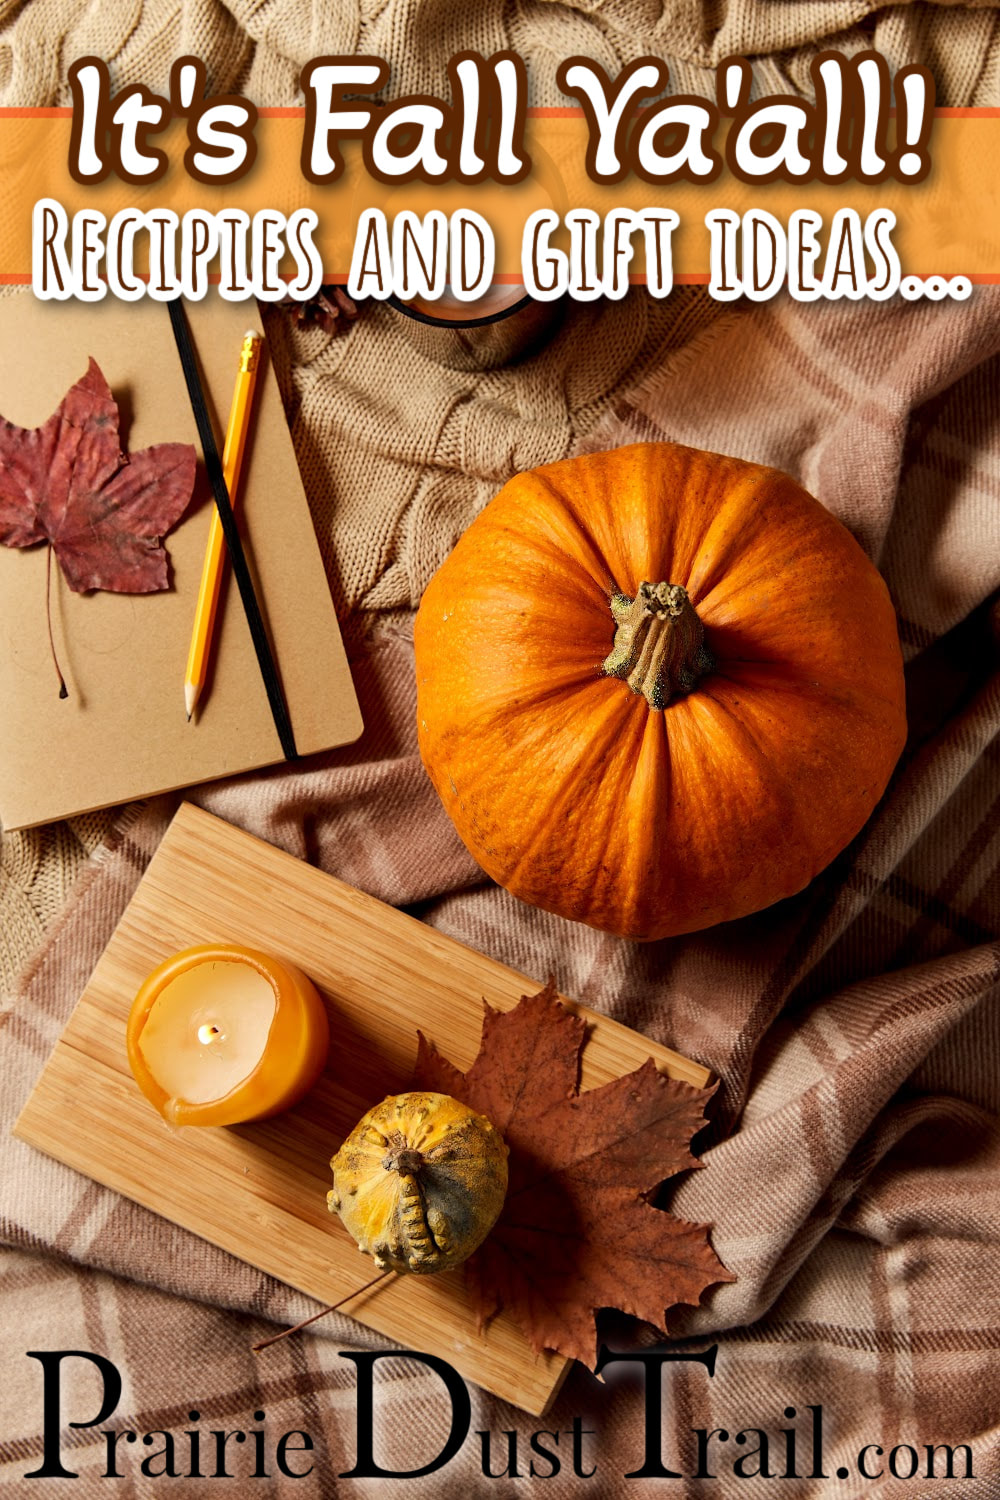 Unfortunately, my favorite spice company doesn't have Pumpkin Pie spice. So I'm going to have to make my own this year. I've been making my own Autumn Immune Boosting oil for several years now. I thought I'd share some recipes and gift ideas with you as I'm preparing to enjoy these lovely scents.